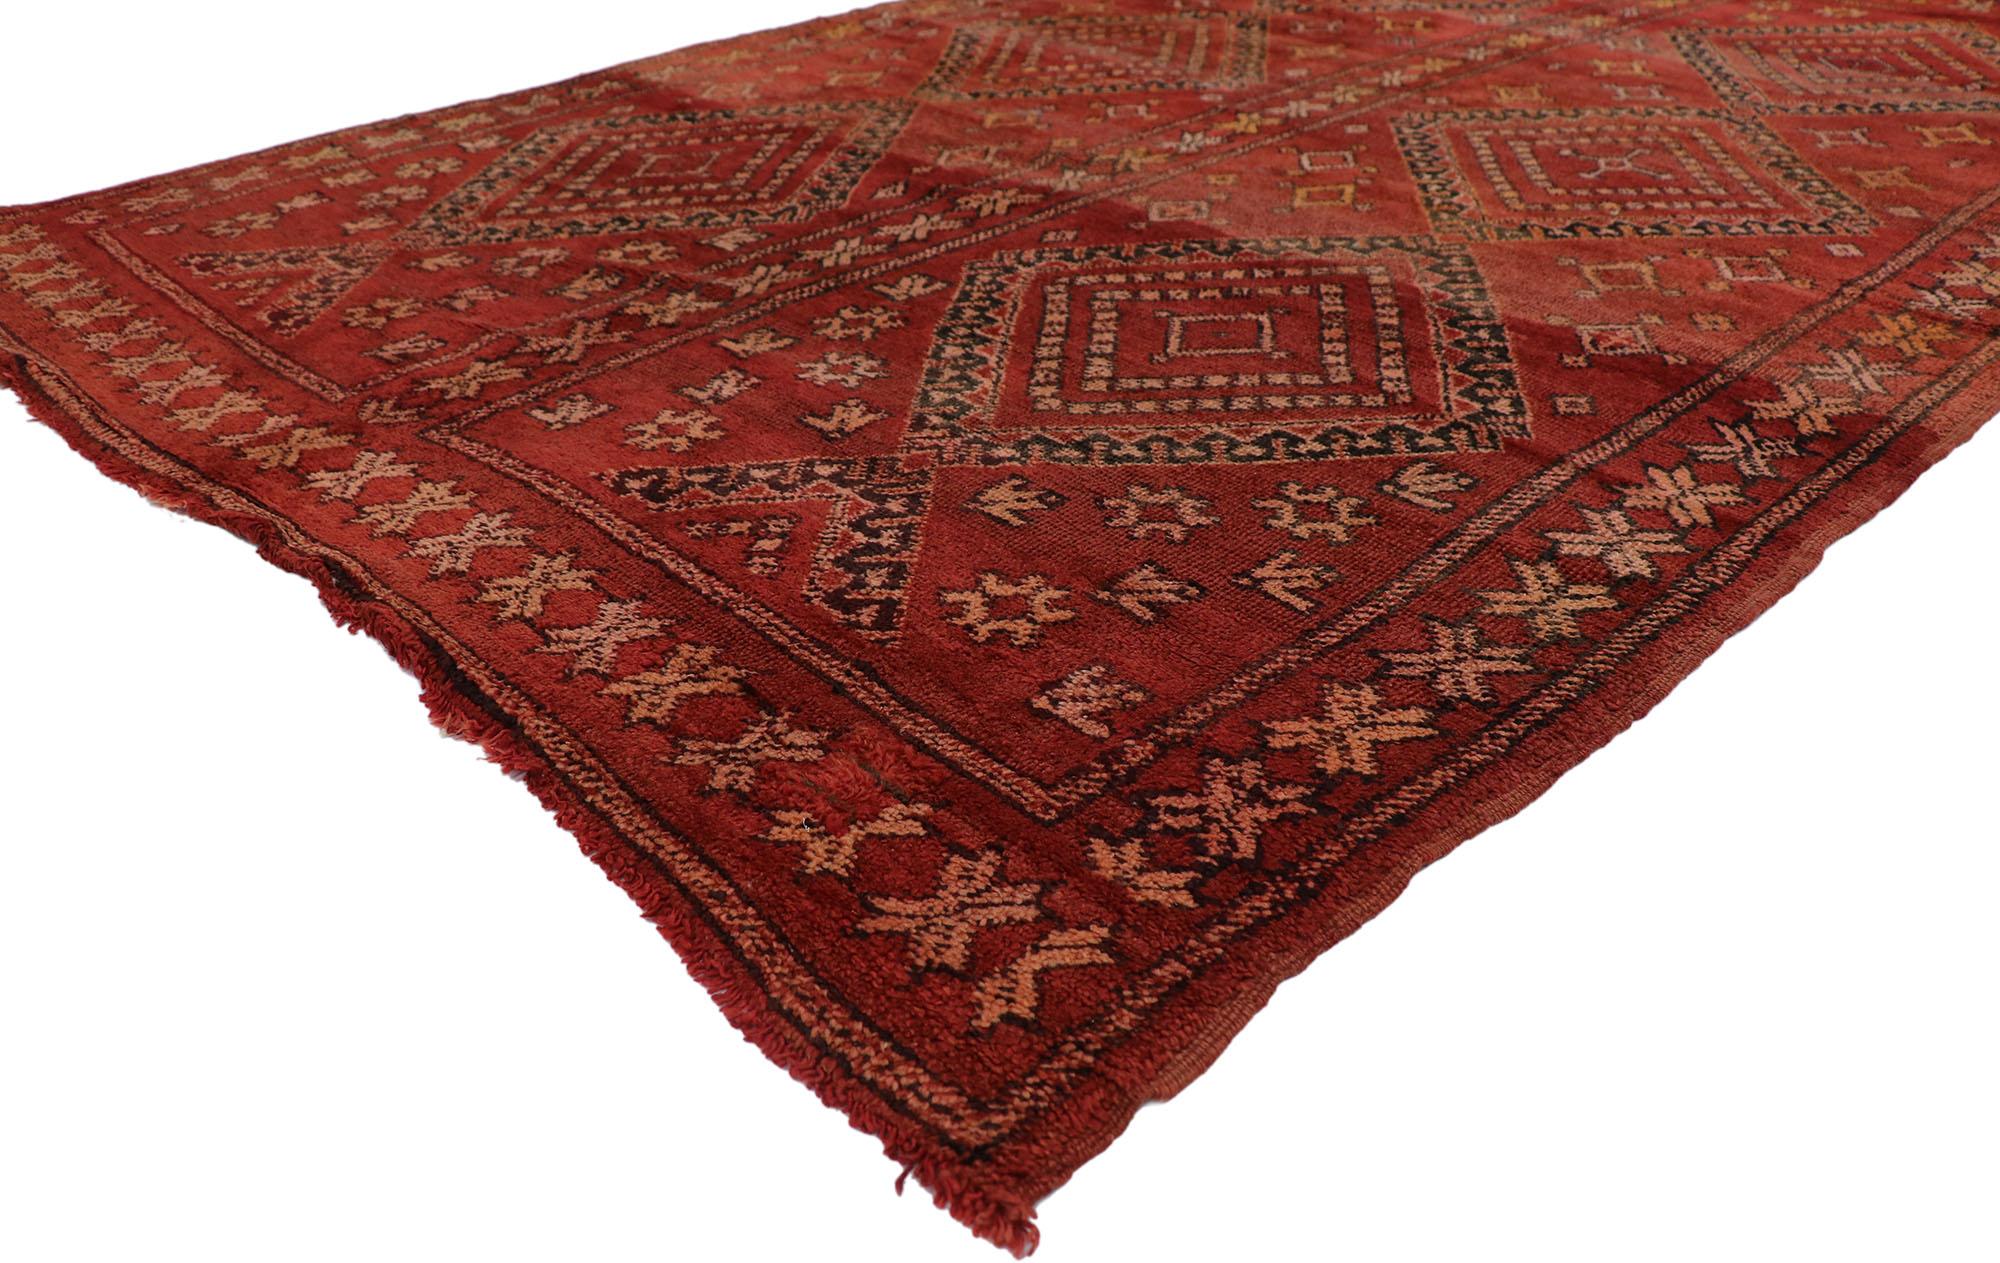 21526 Vintage Berber Moroccan Rug with Tribal Style 06'03 x 09'07. Showcasing a bold expressive design, incredible detail and texture, this hand knotted wool vintage Berber Moroccan rug is a captivating vision of woven beauty. The eye-catching